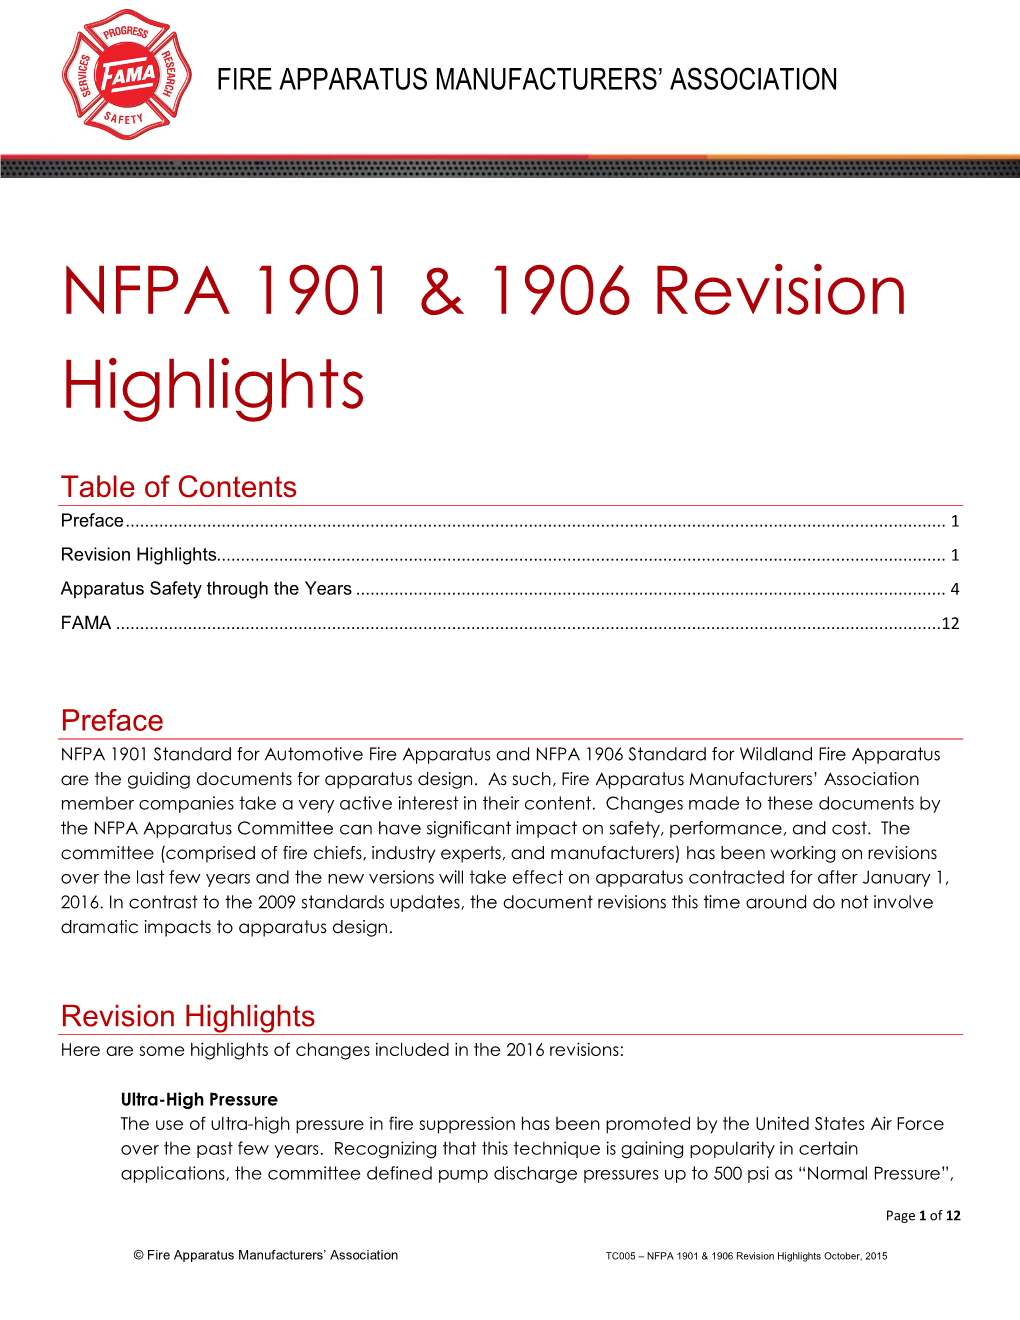 NFPA 1901 & 1906 Revision Highlights